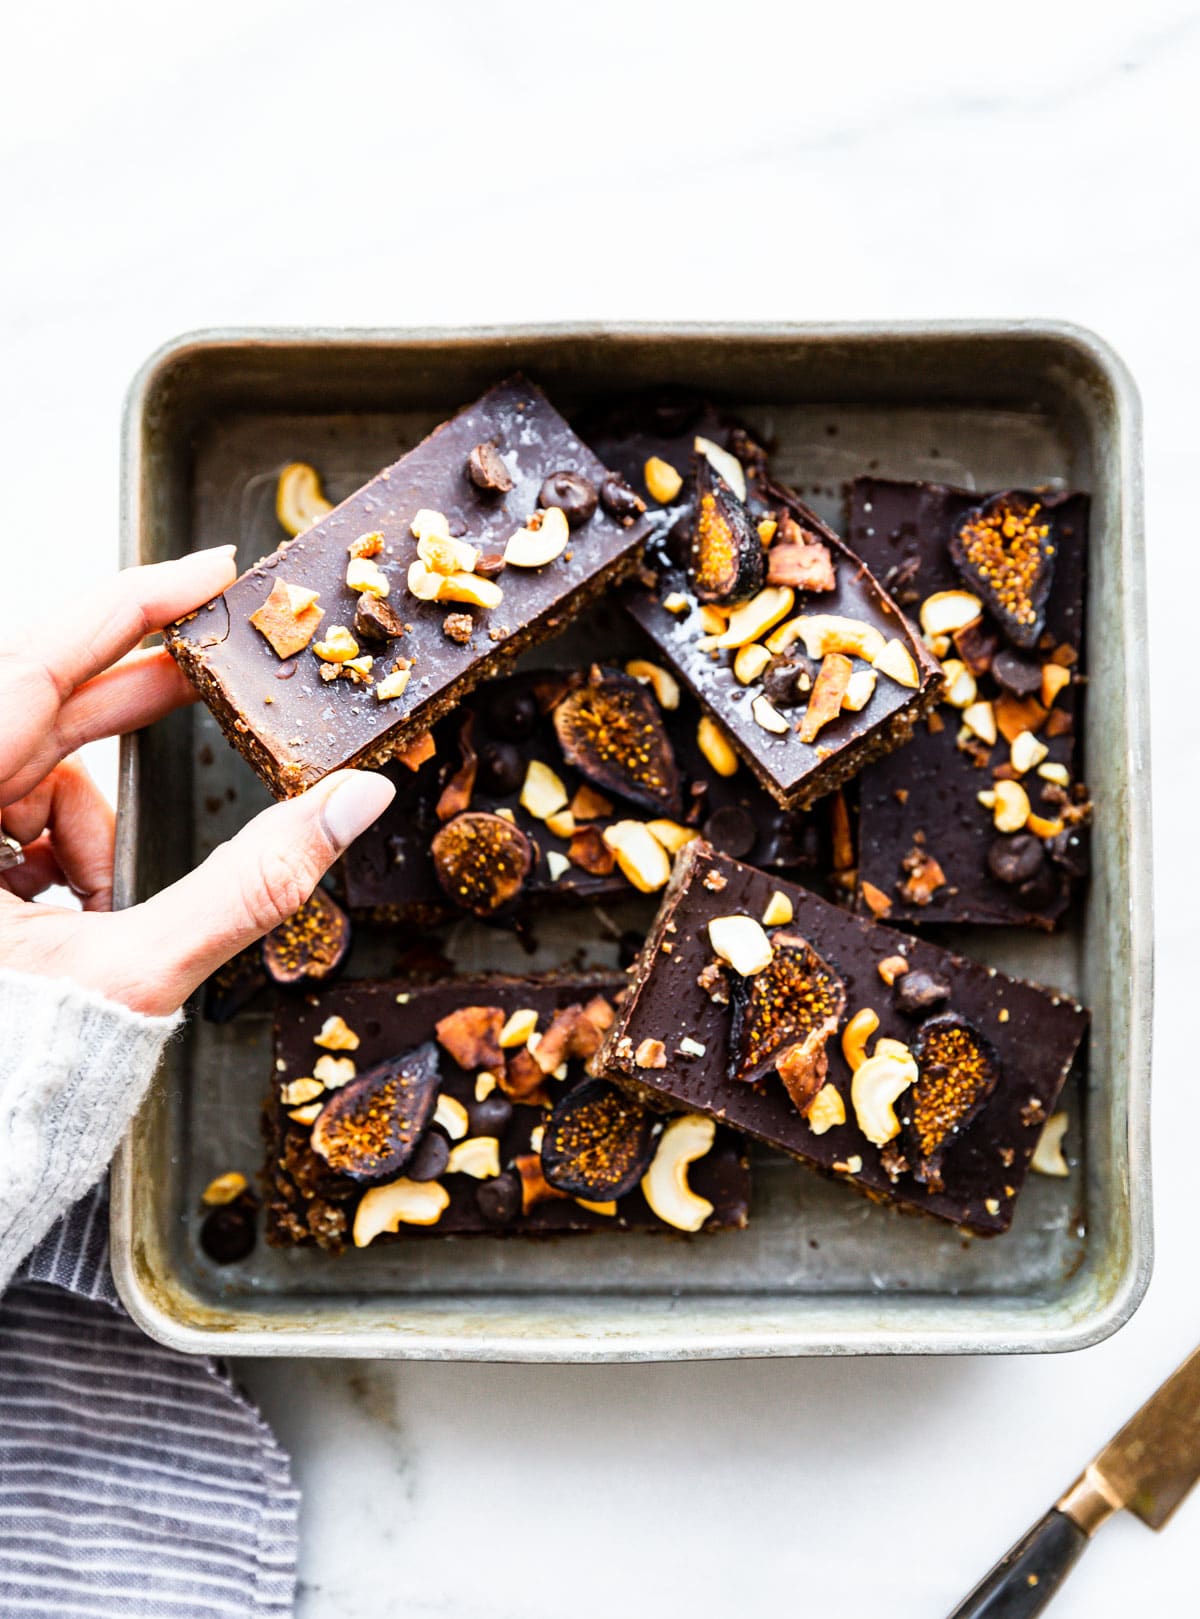 No Bake Chocolate Coconut Cashew Fig Bars cut into long bars in square baking sheet, a hand holding up one bar